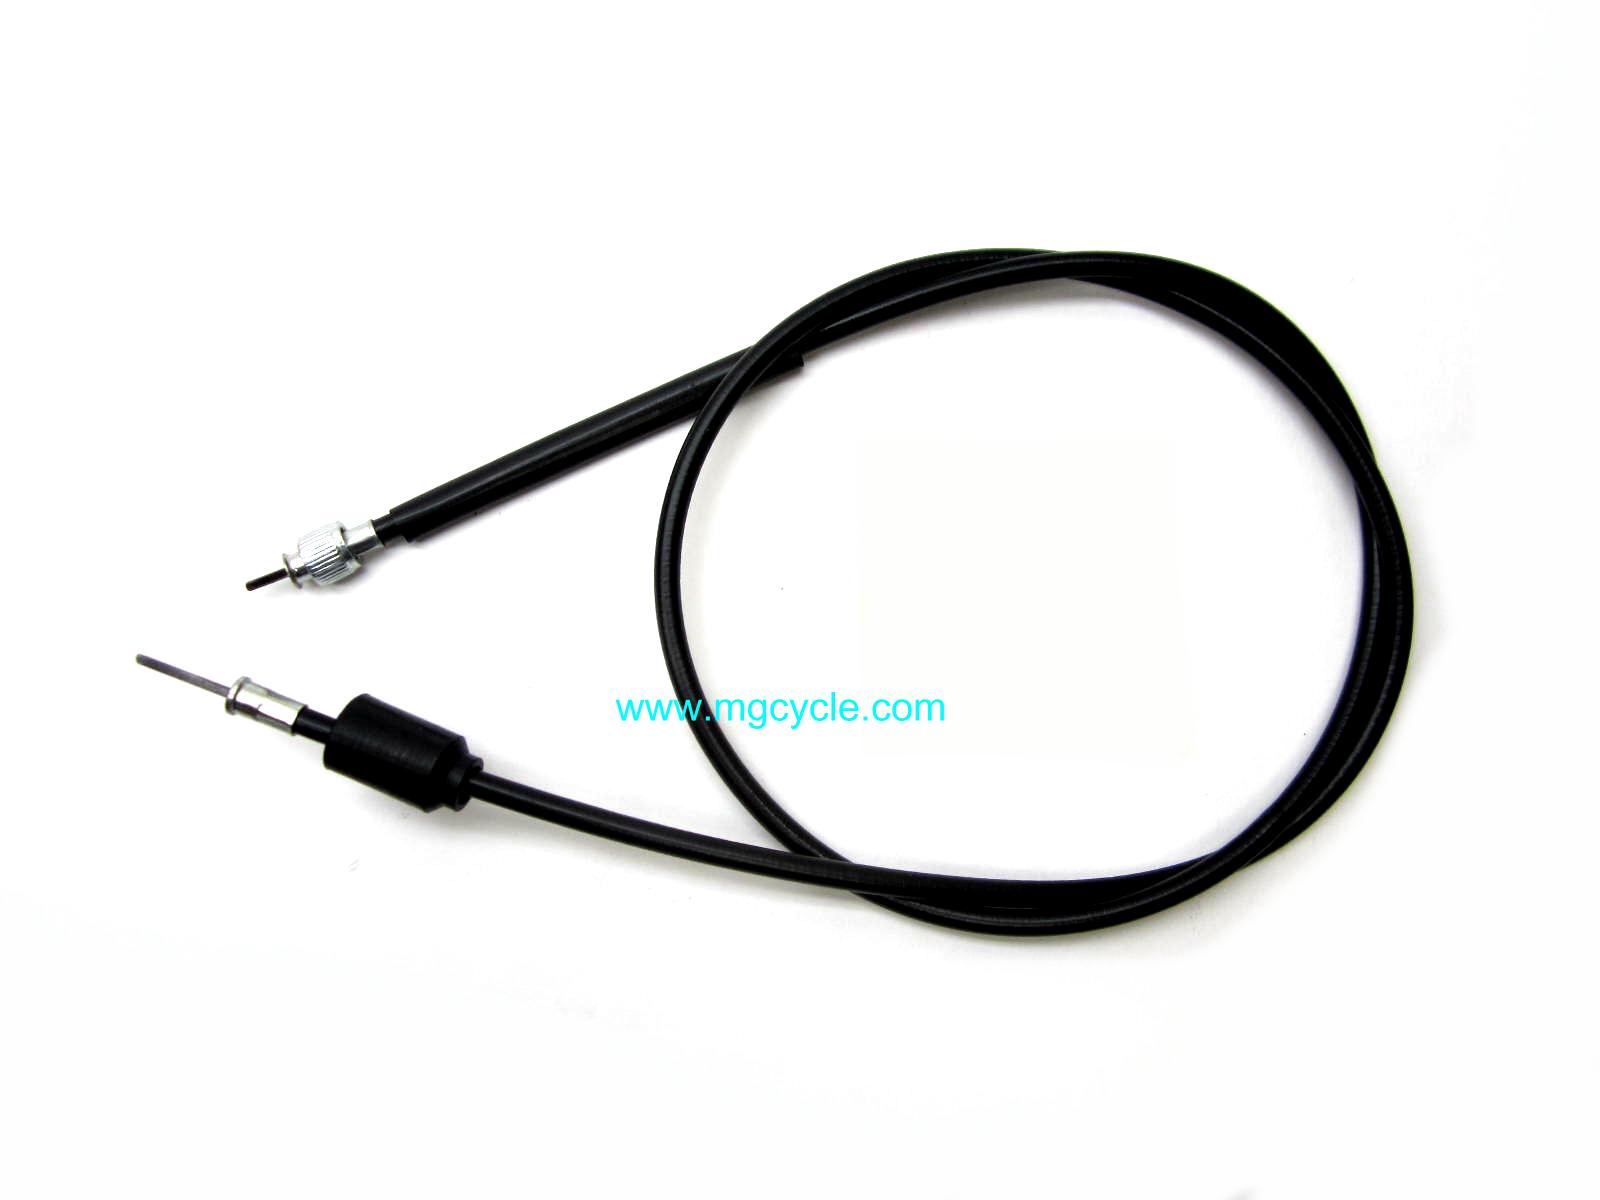 Speedo cable 2002 and later Stone/Touring/Metal GU03760451